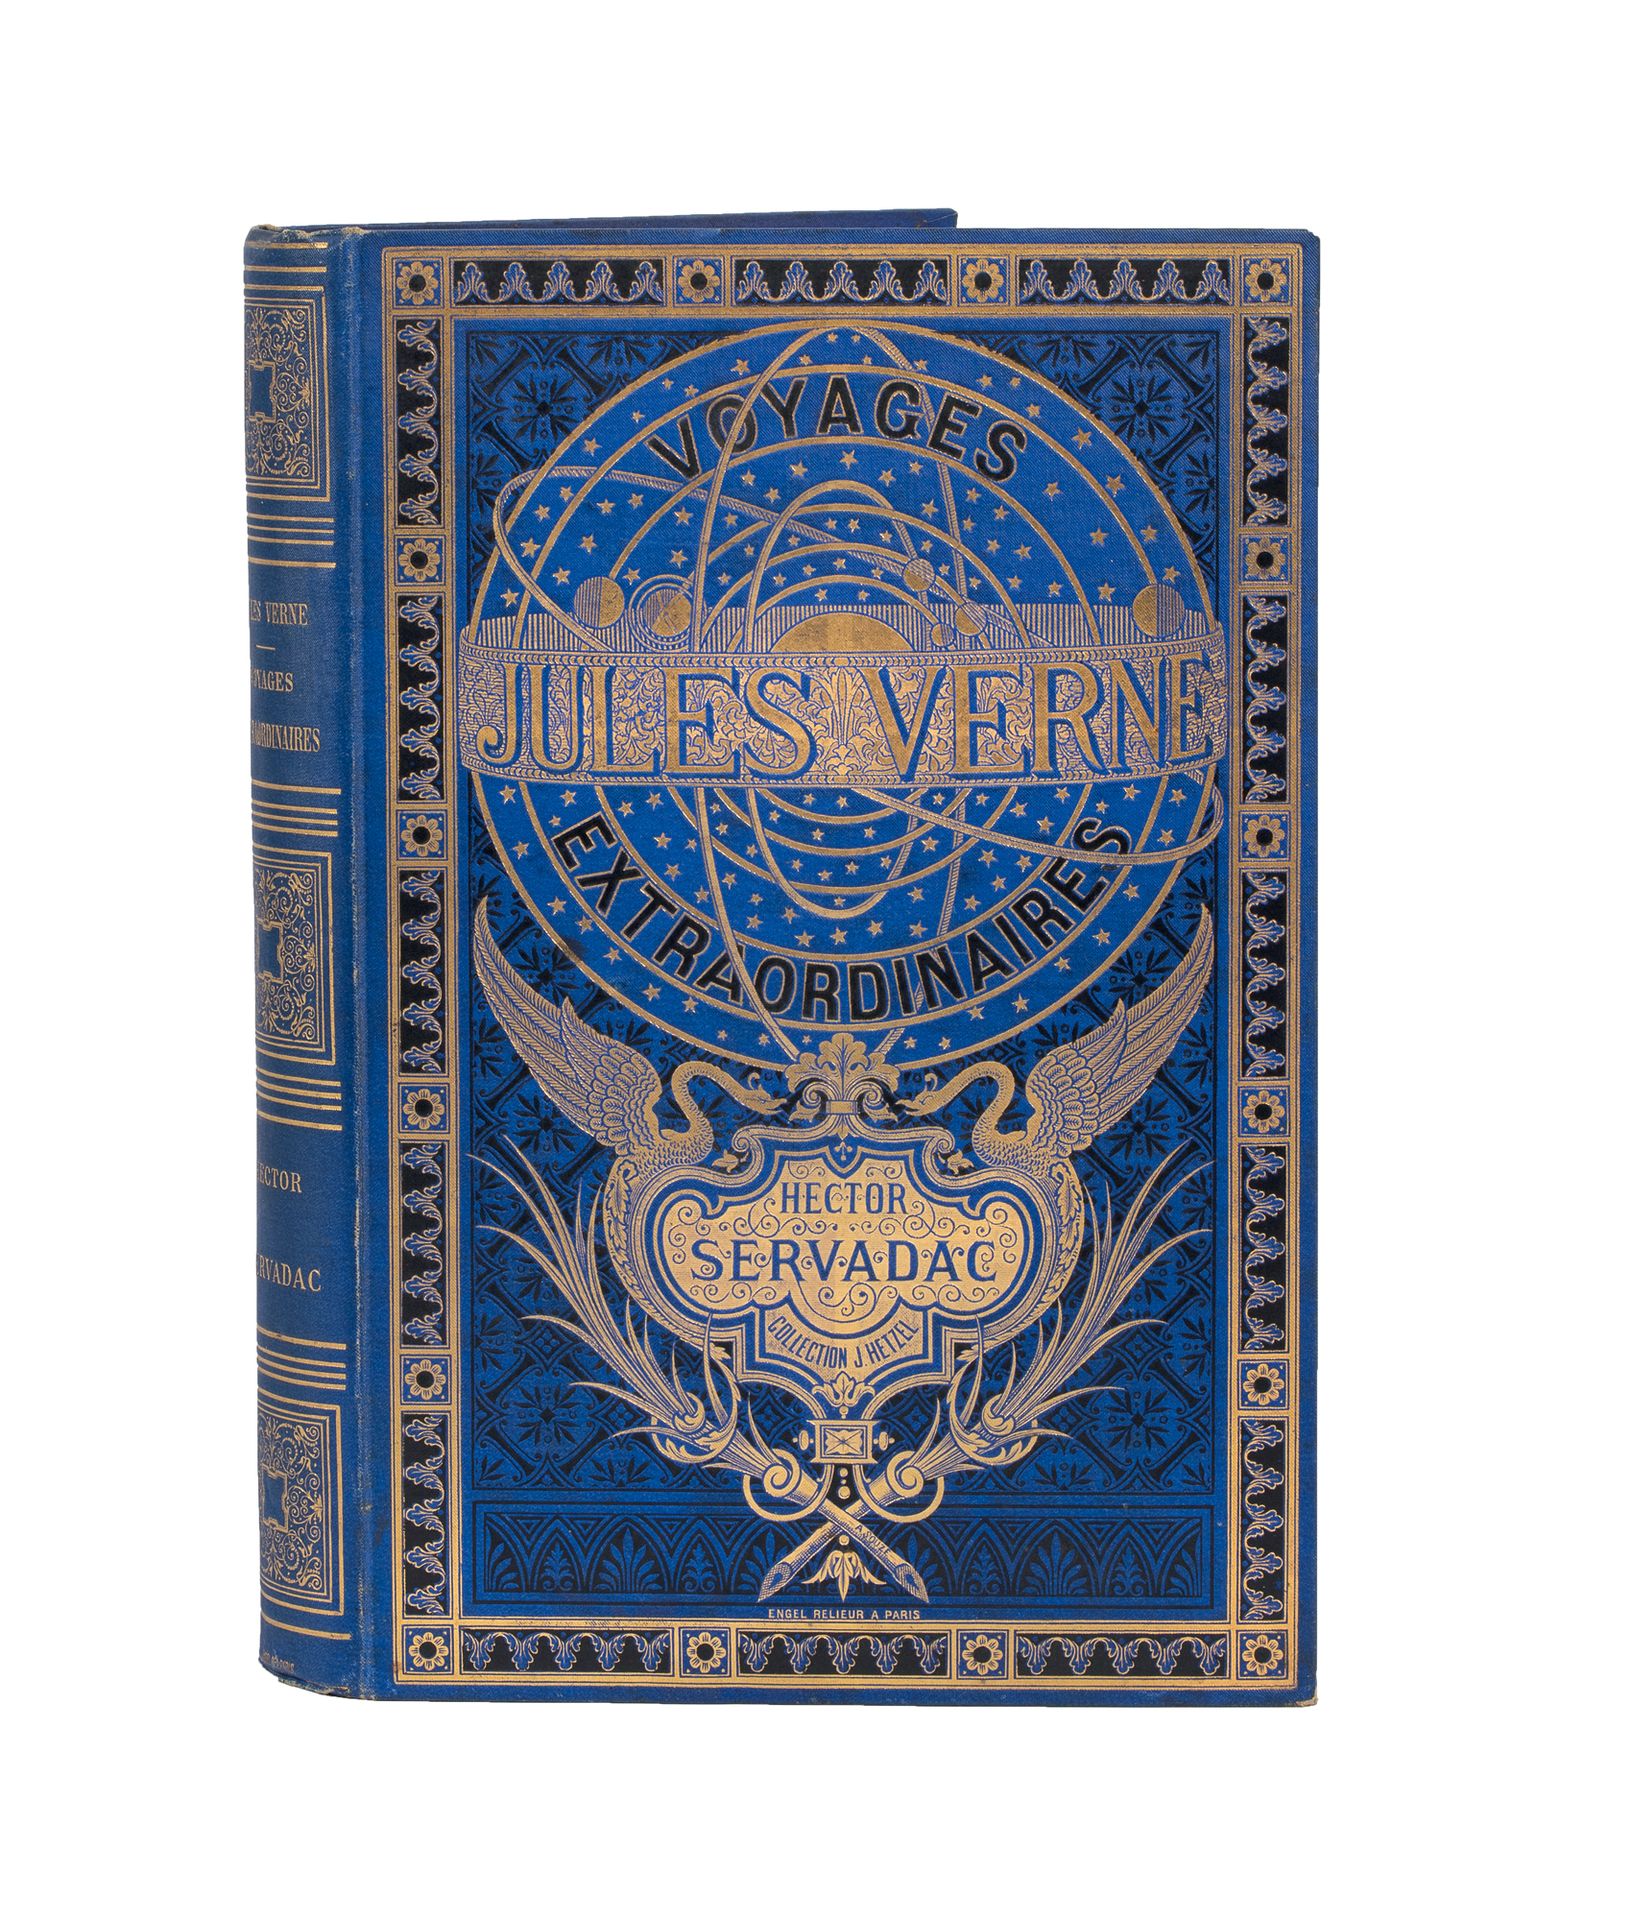 Null Celestial Spaces] Hector Servadac by Jules Verne. Illustrations by P. Phili&hellip;